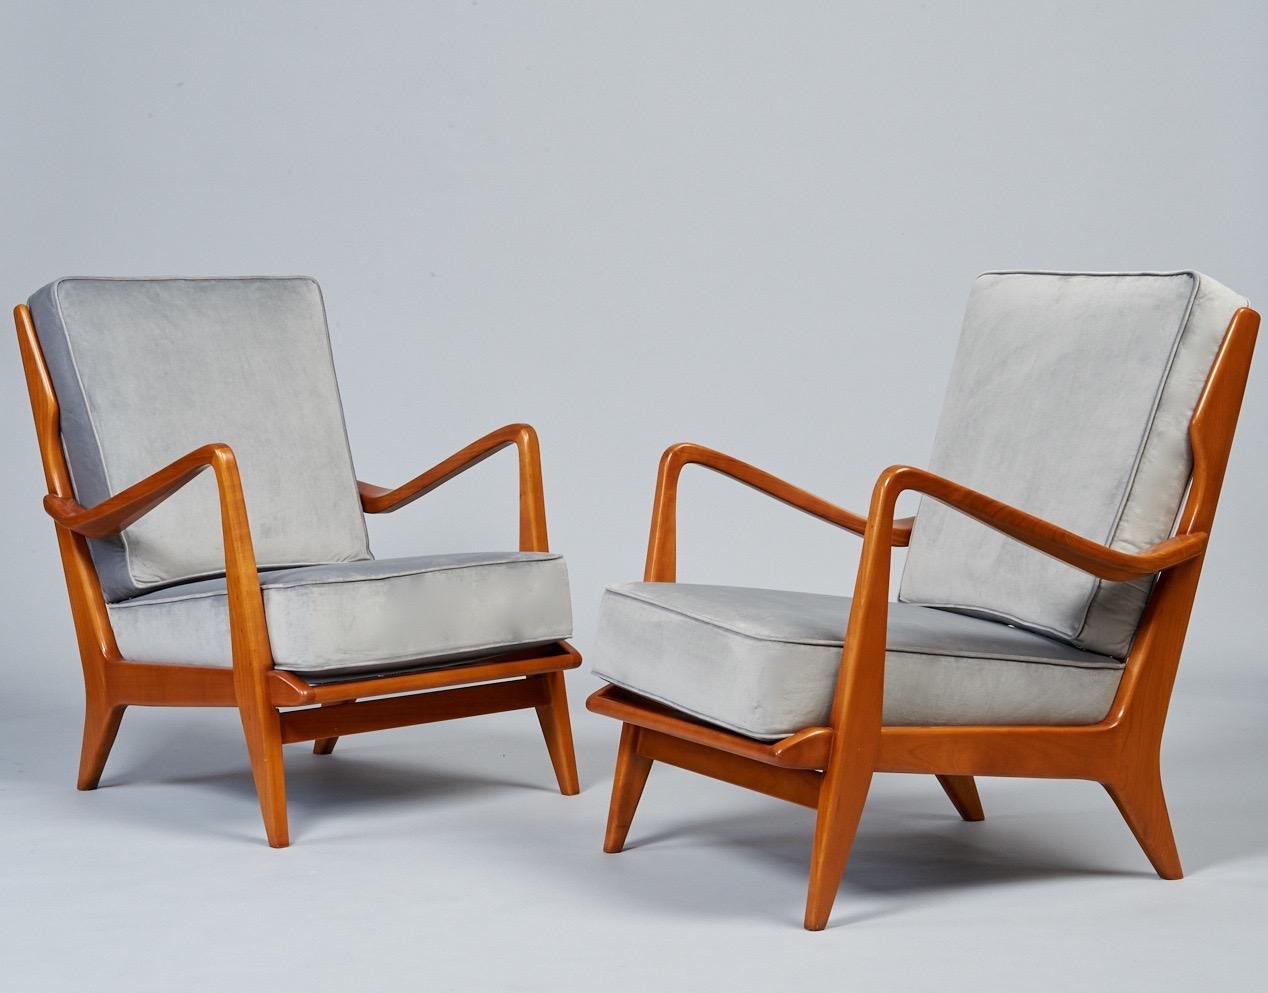 Gio Ponti (1891 - 1979).

A rare and masterful pair of sculptural lounge chairs by Gio Ponti for Cassina, with sinuously carved arms, architectural tapering back spindles, a gently curved headrest, and subtly modeled and tapered legs. In polished